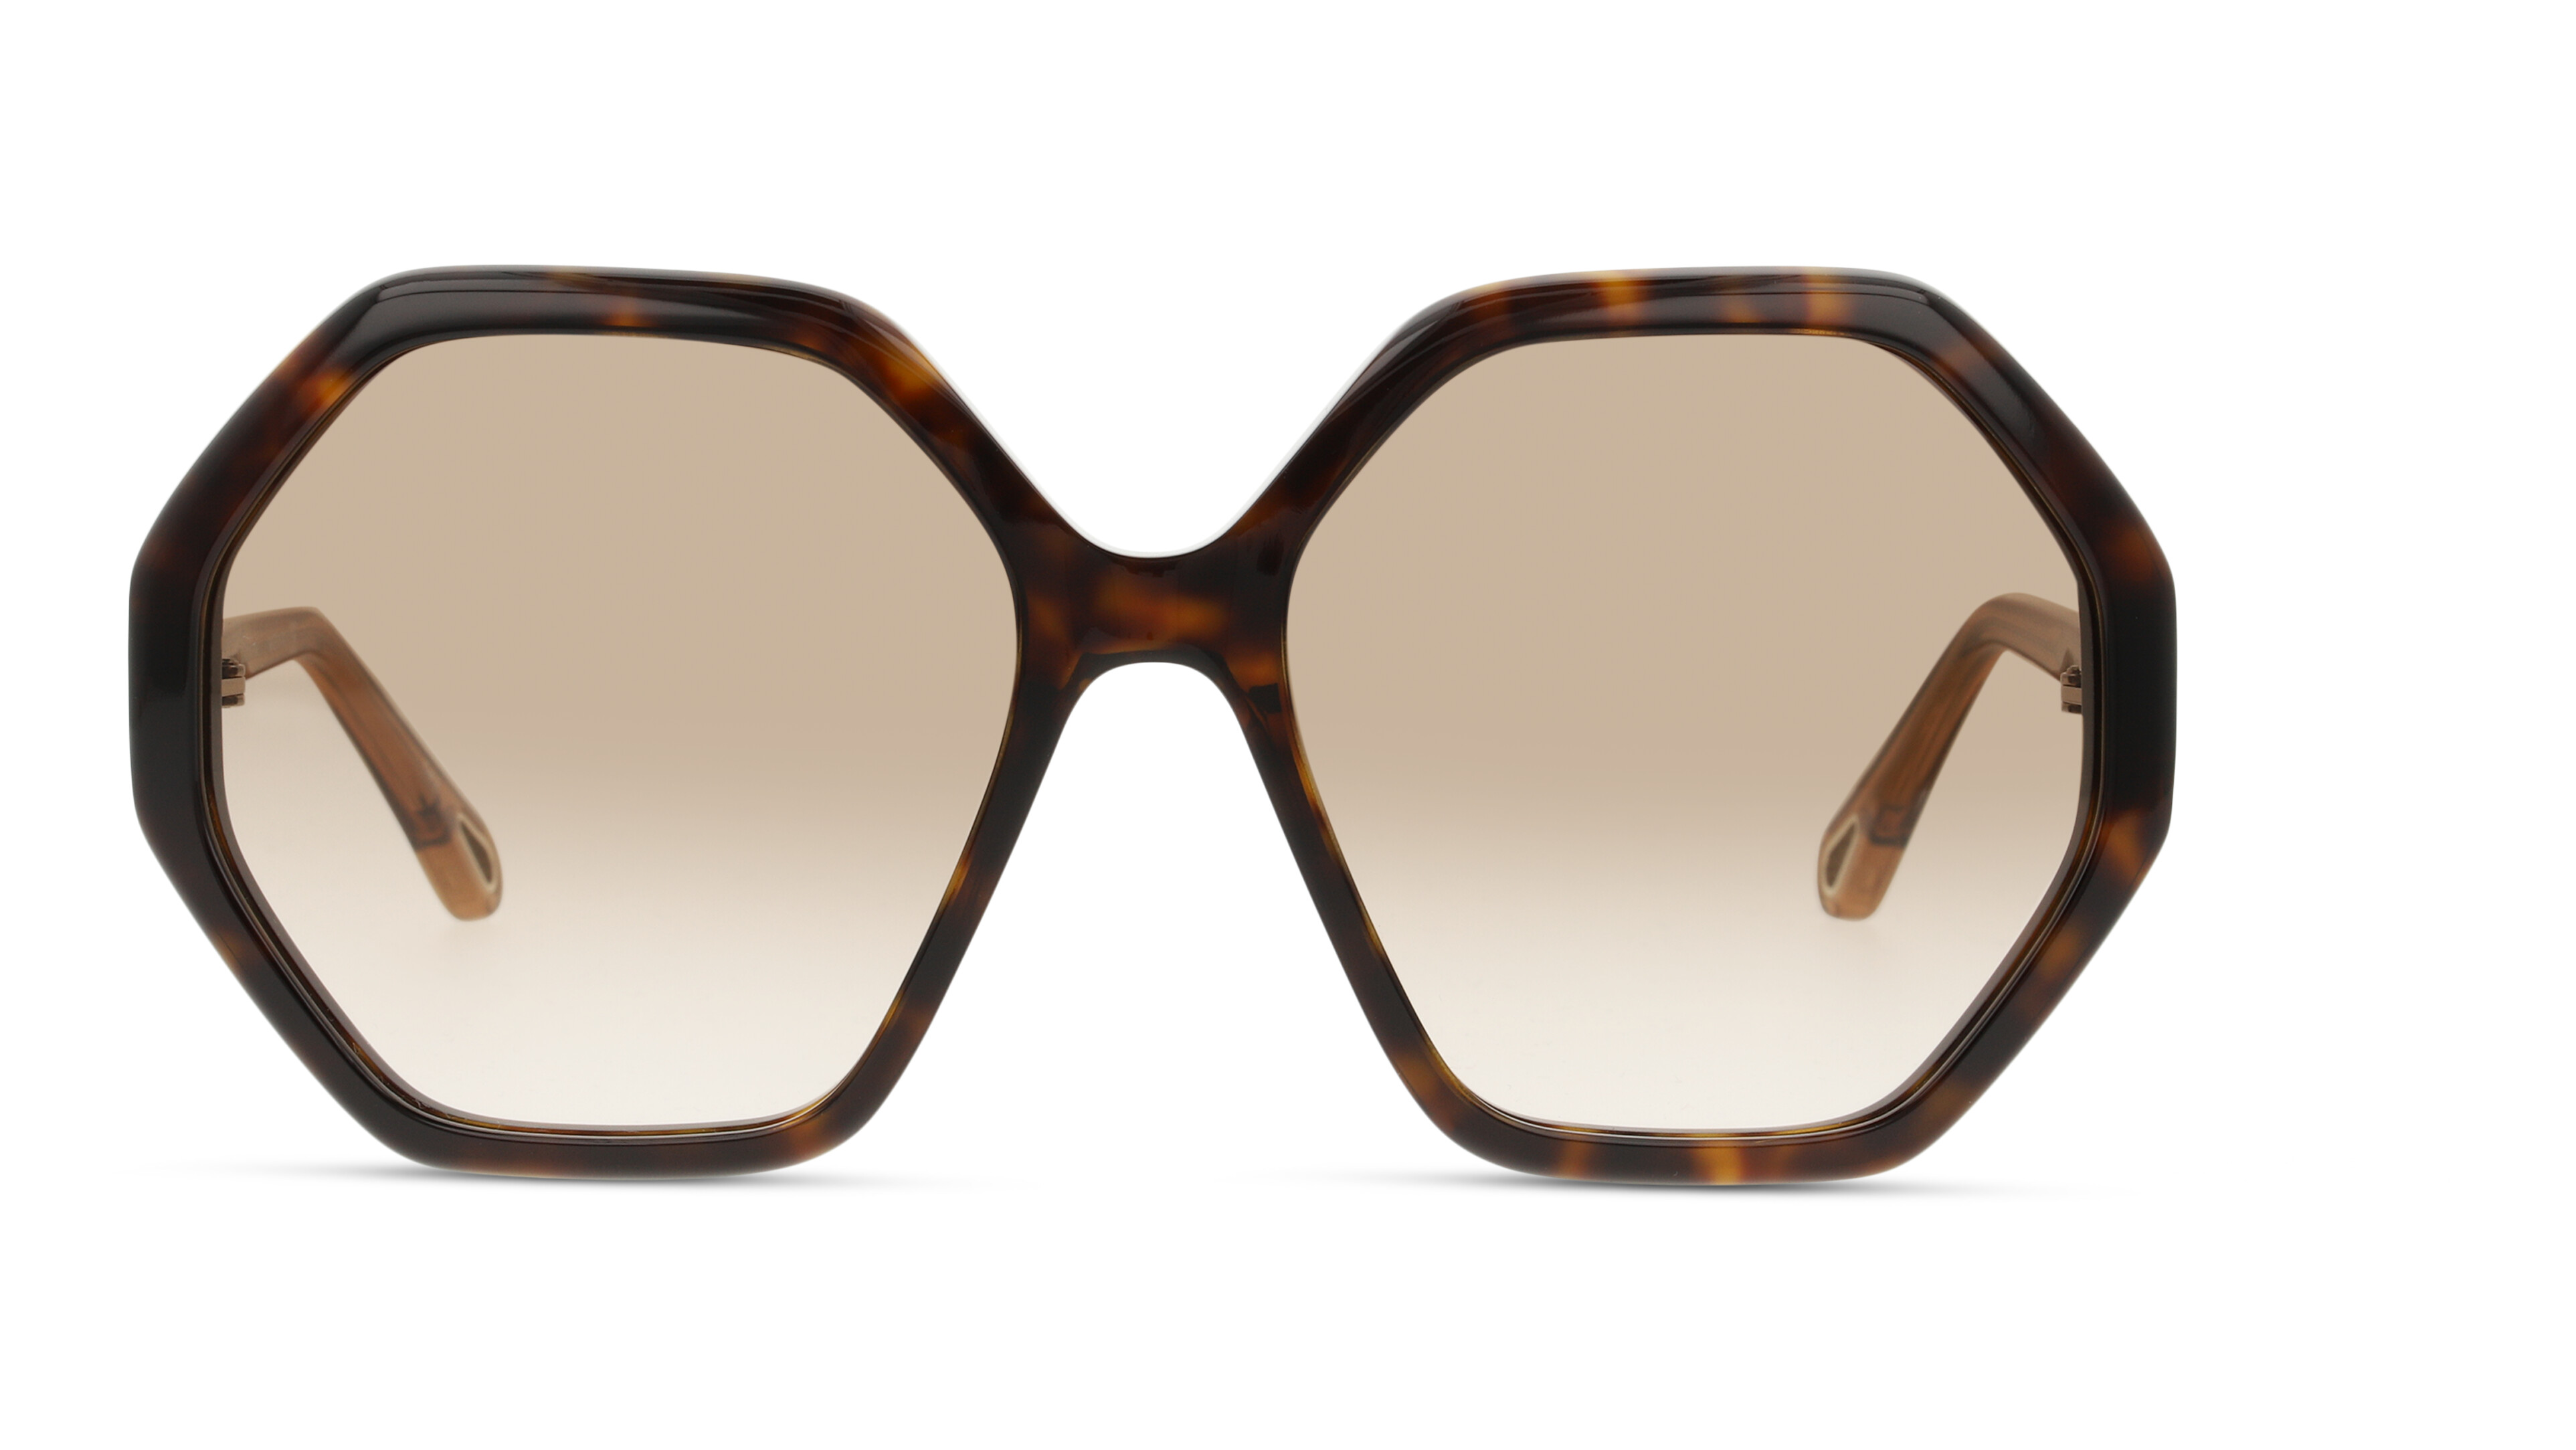 [products.image.front] Chloe CH0008S 004 Sonnenbrille